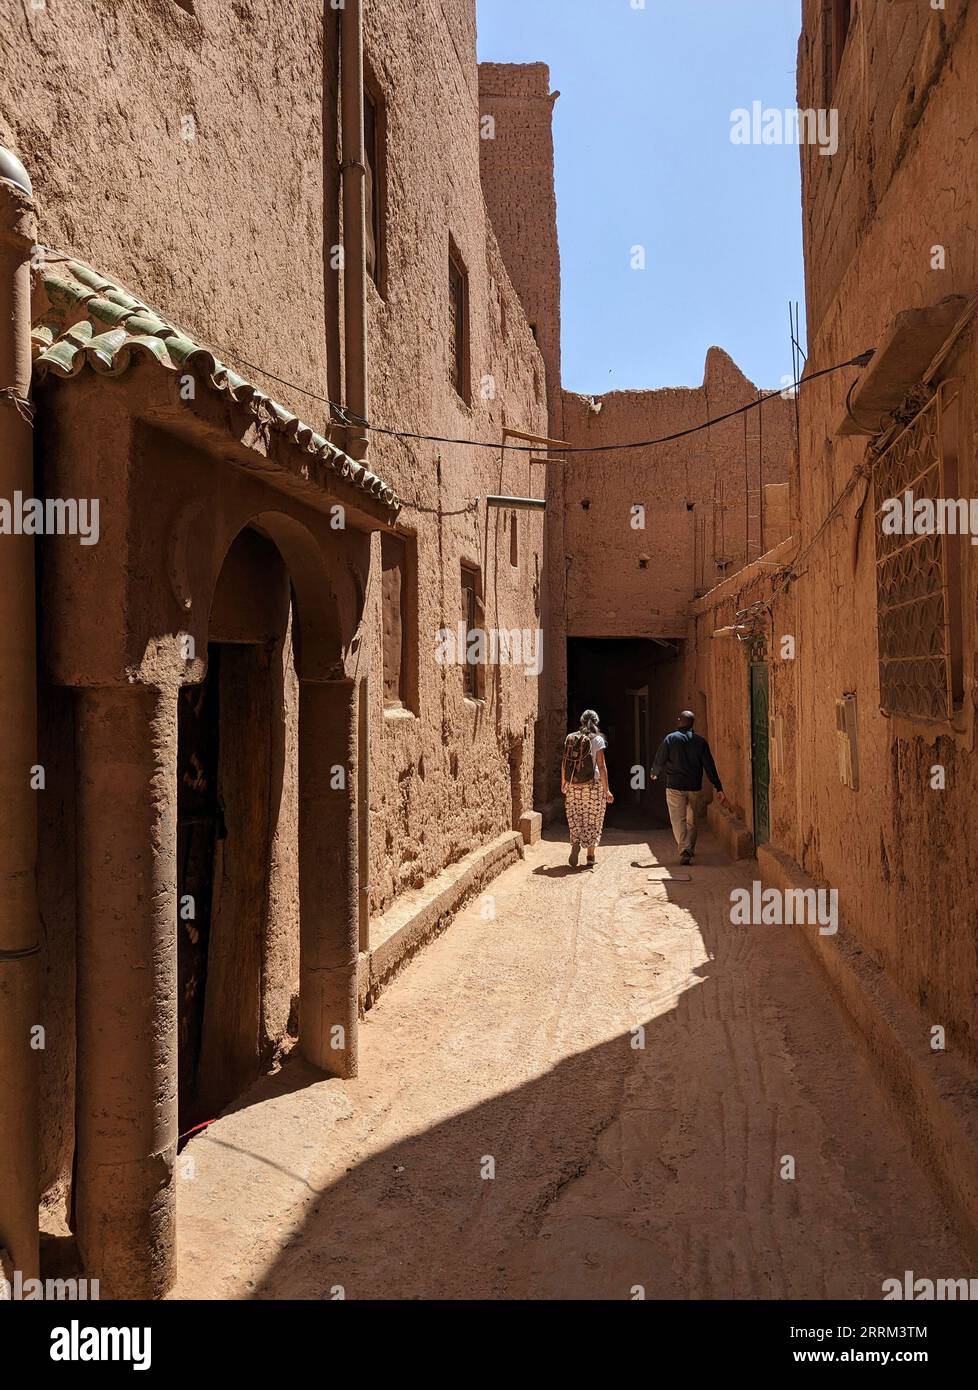 Narrow alleyway in the old historic village center of Amezrou in the Draa valley, Morocco Stock Photo